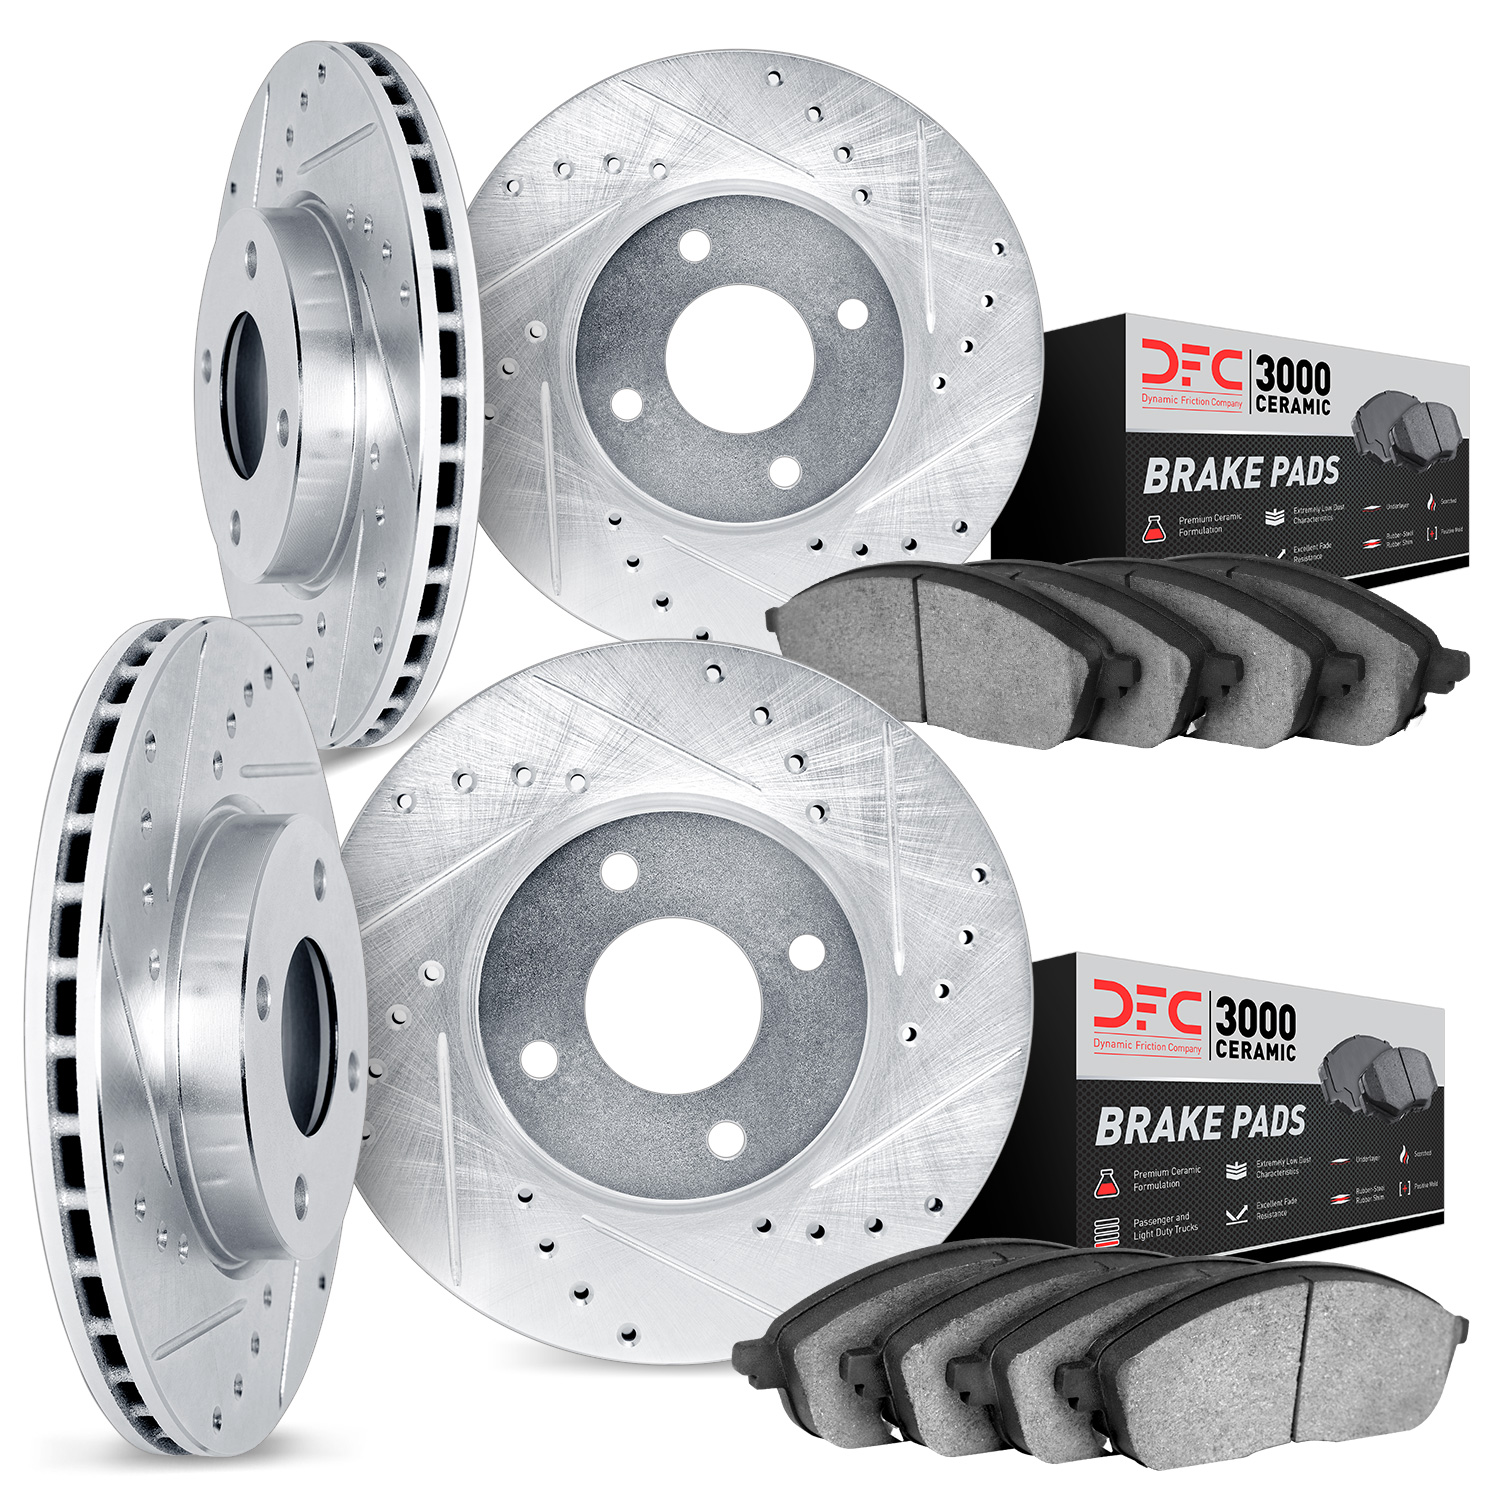 7304-56025 Drilled/Slotted Brake Rotor with 3000-Series Ceramic Brake Pads Kit [Silver], 1999-2000 Ford/Lincoln/Mercury/Mazda, P